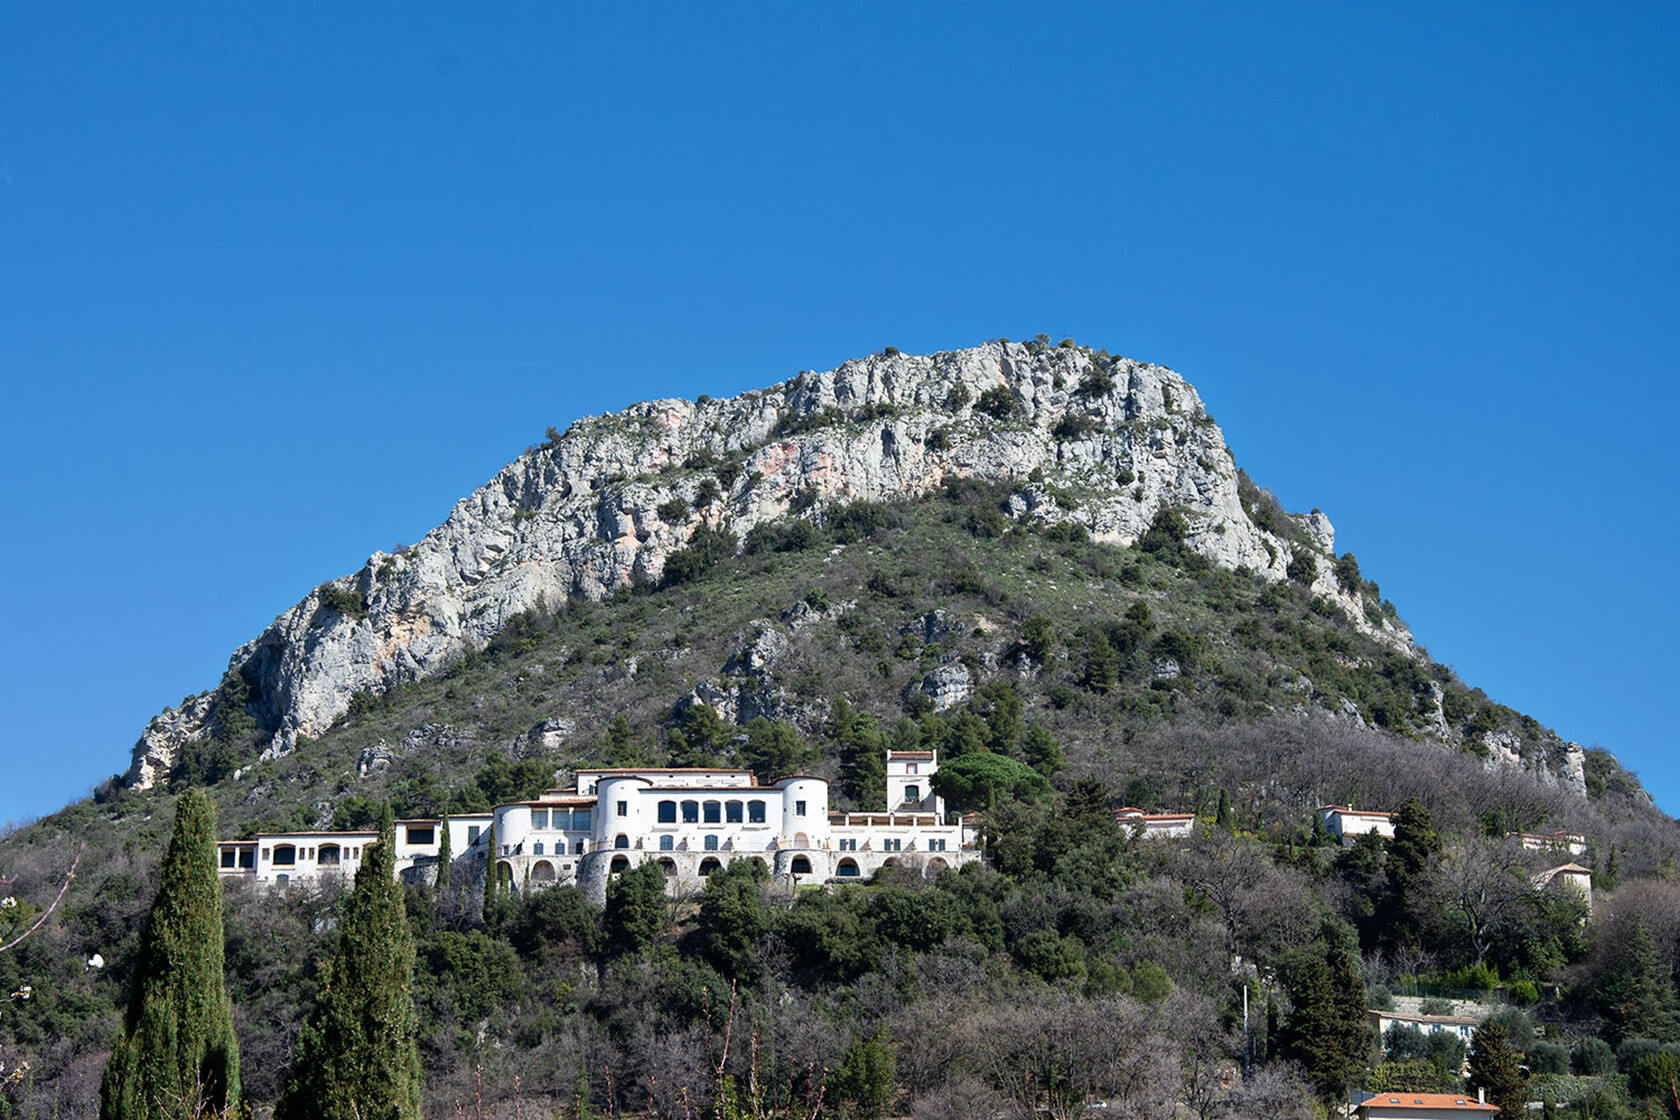 The Château Saint-Martin & Spa with the Baou des Blancs behind it